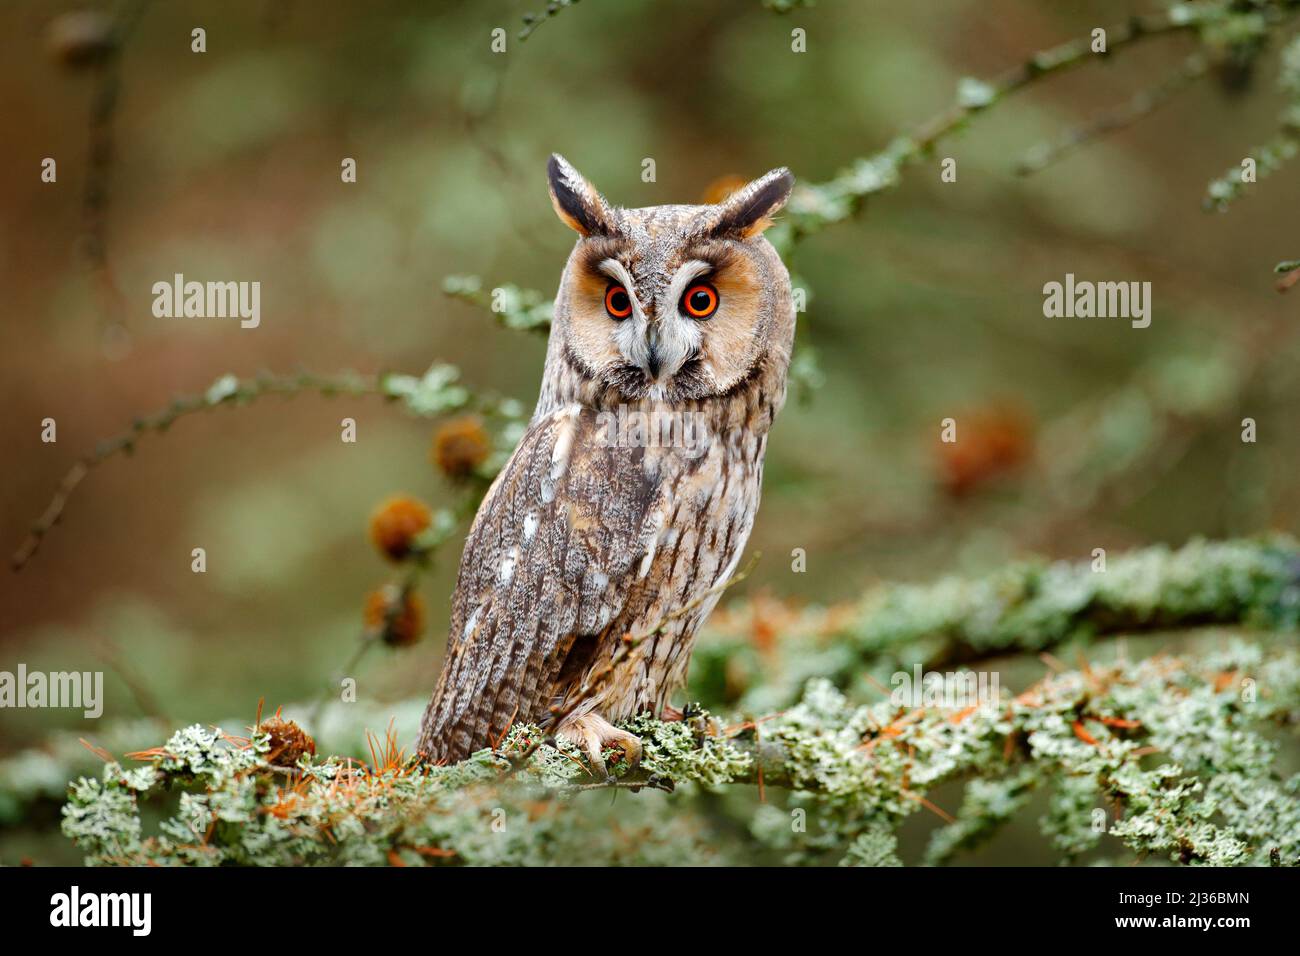 Owl in nature wood nature habitat. Bird sitting on the tree, long ears. Owl hunting. Green lichen Hypogymnia physodes. Long-eared Owl sitting on the b Stock Photo